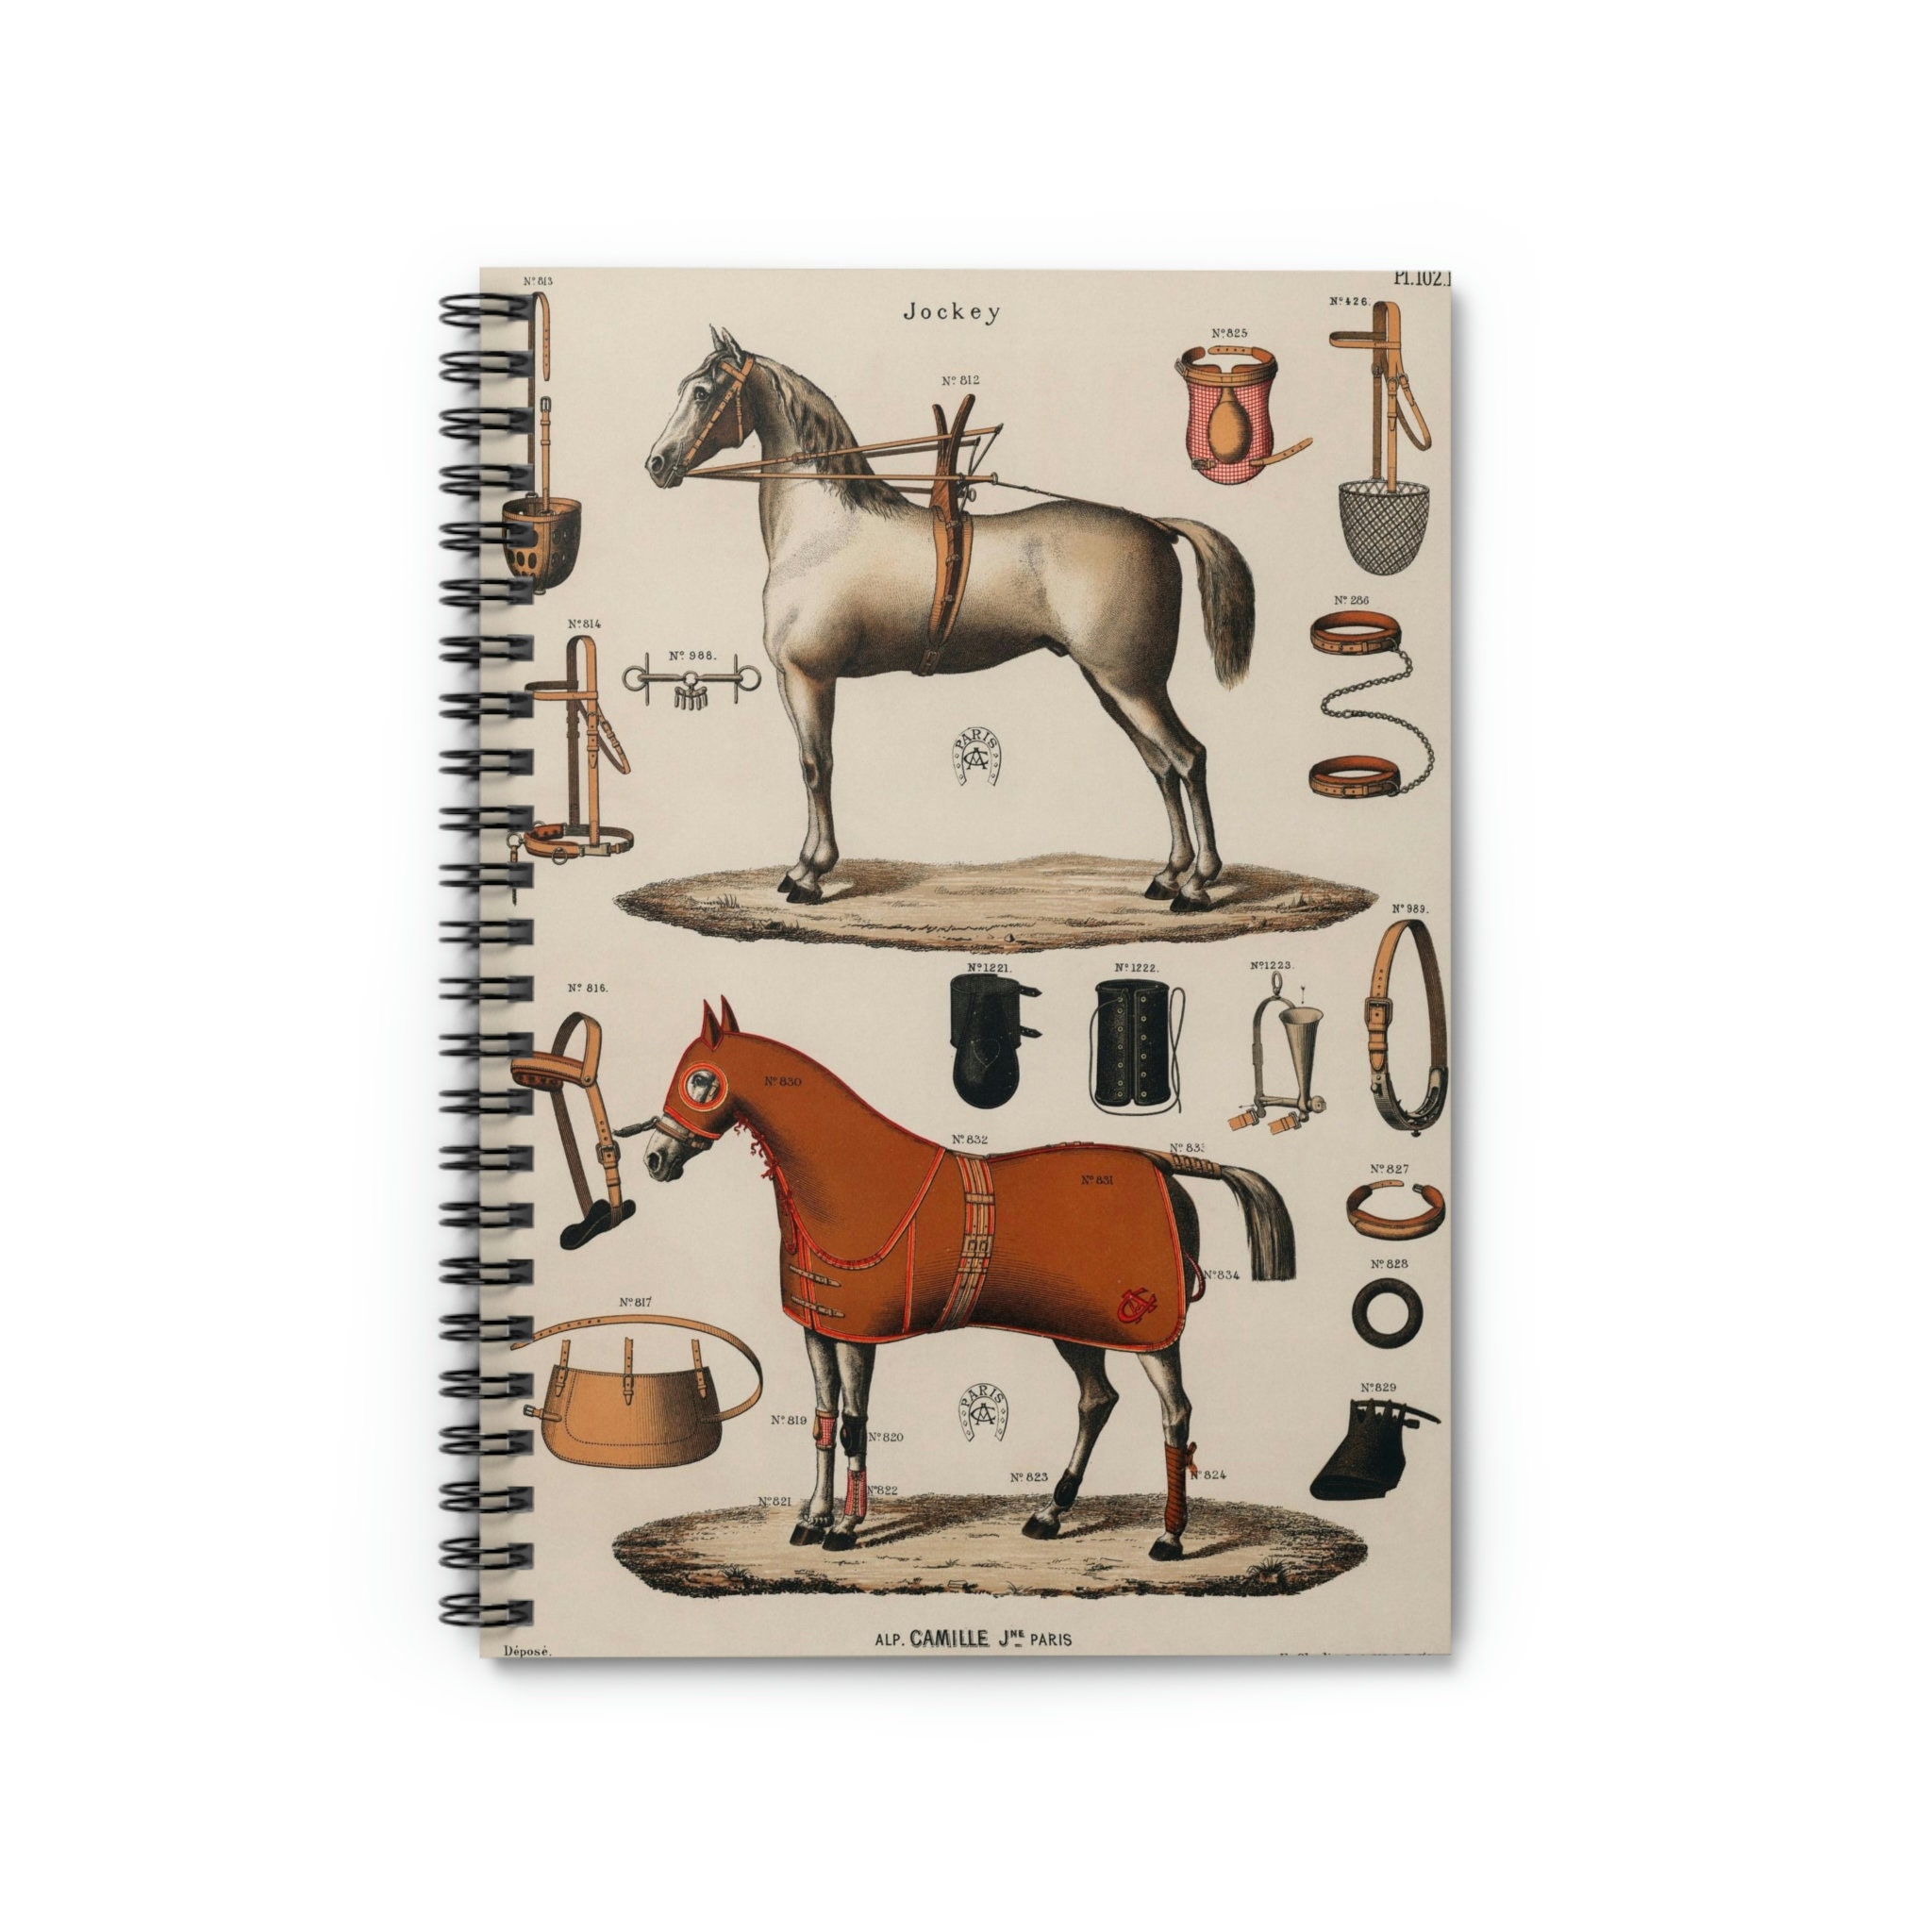 HORSE UNRULED NOTEBOOK: UNRULED, BLANK NOTEBOOK. NO LINES. By